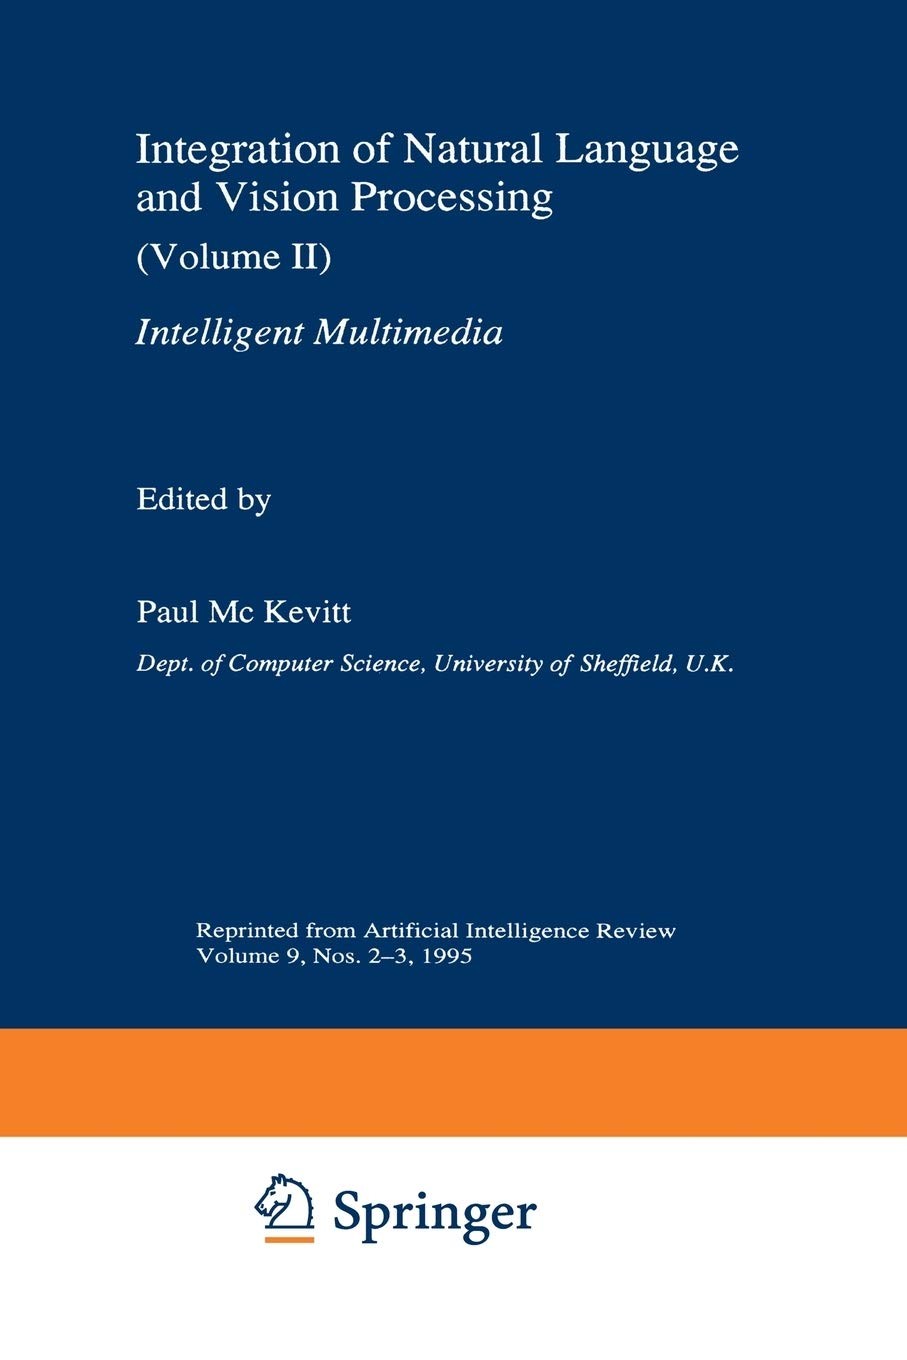 Integration of Natural Language and Vision Processing: (Volume II) Intelligent Multimedia